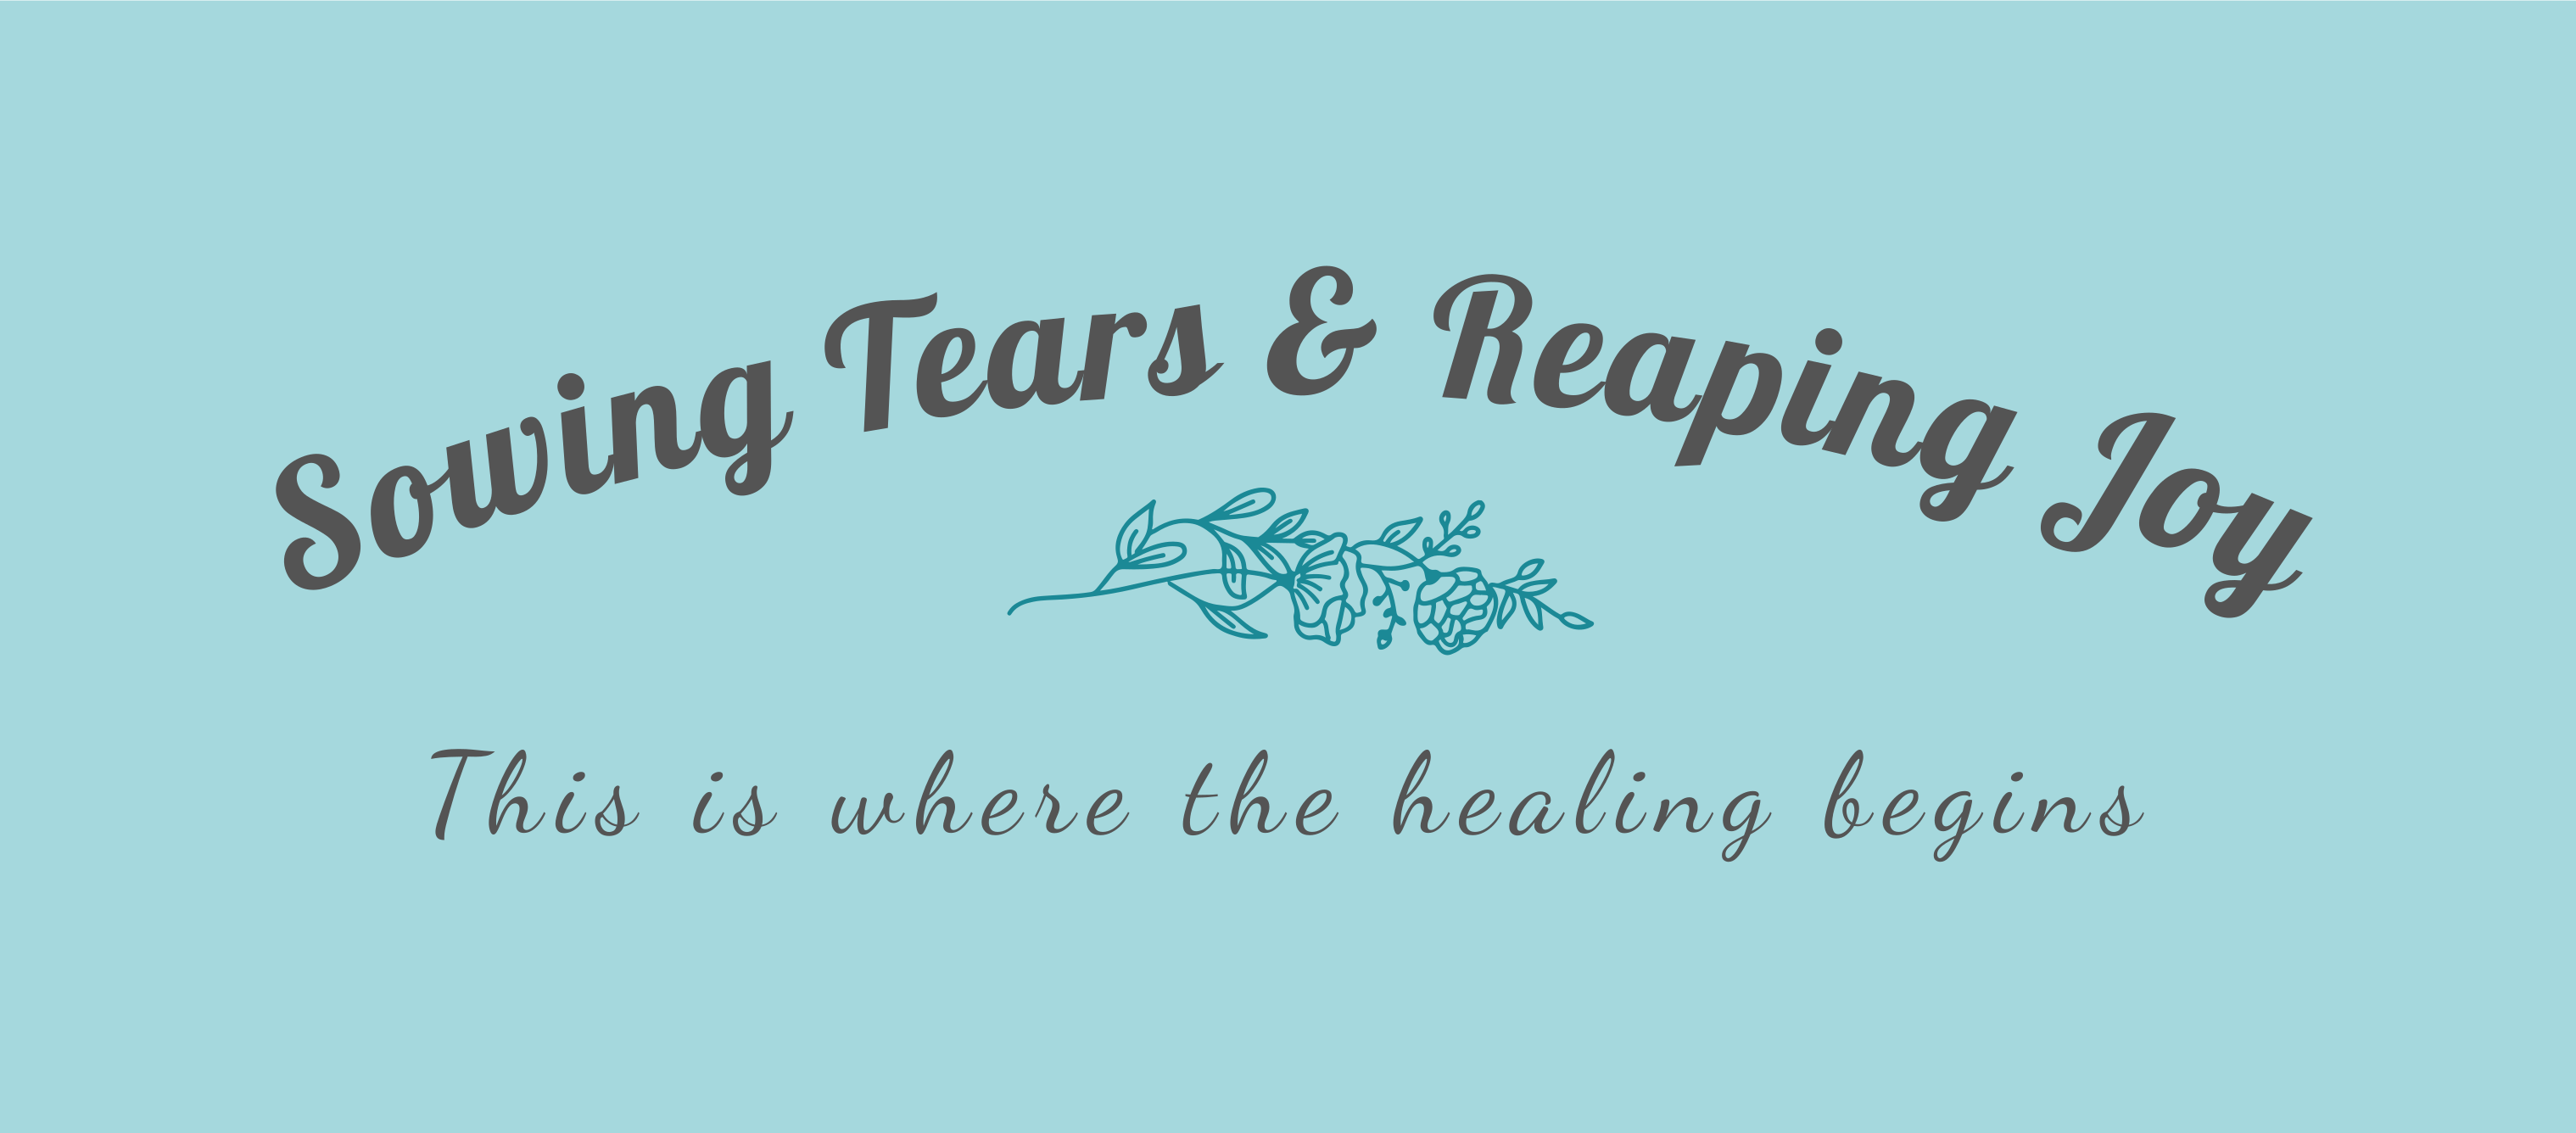 Sowing tears and reaping joy